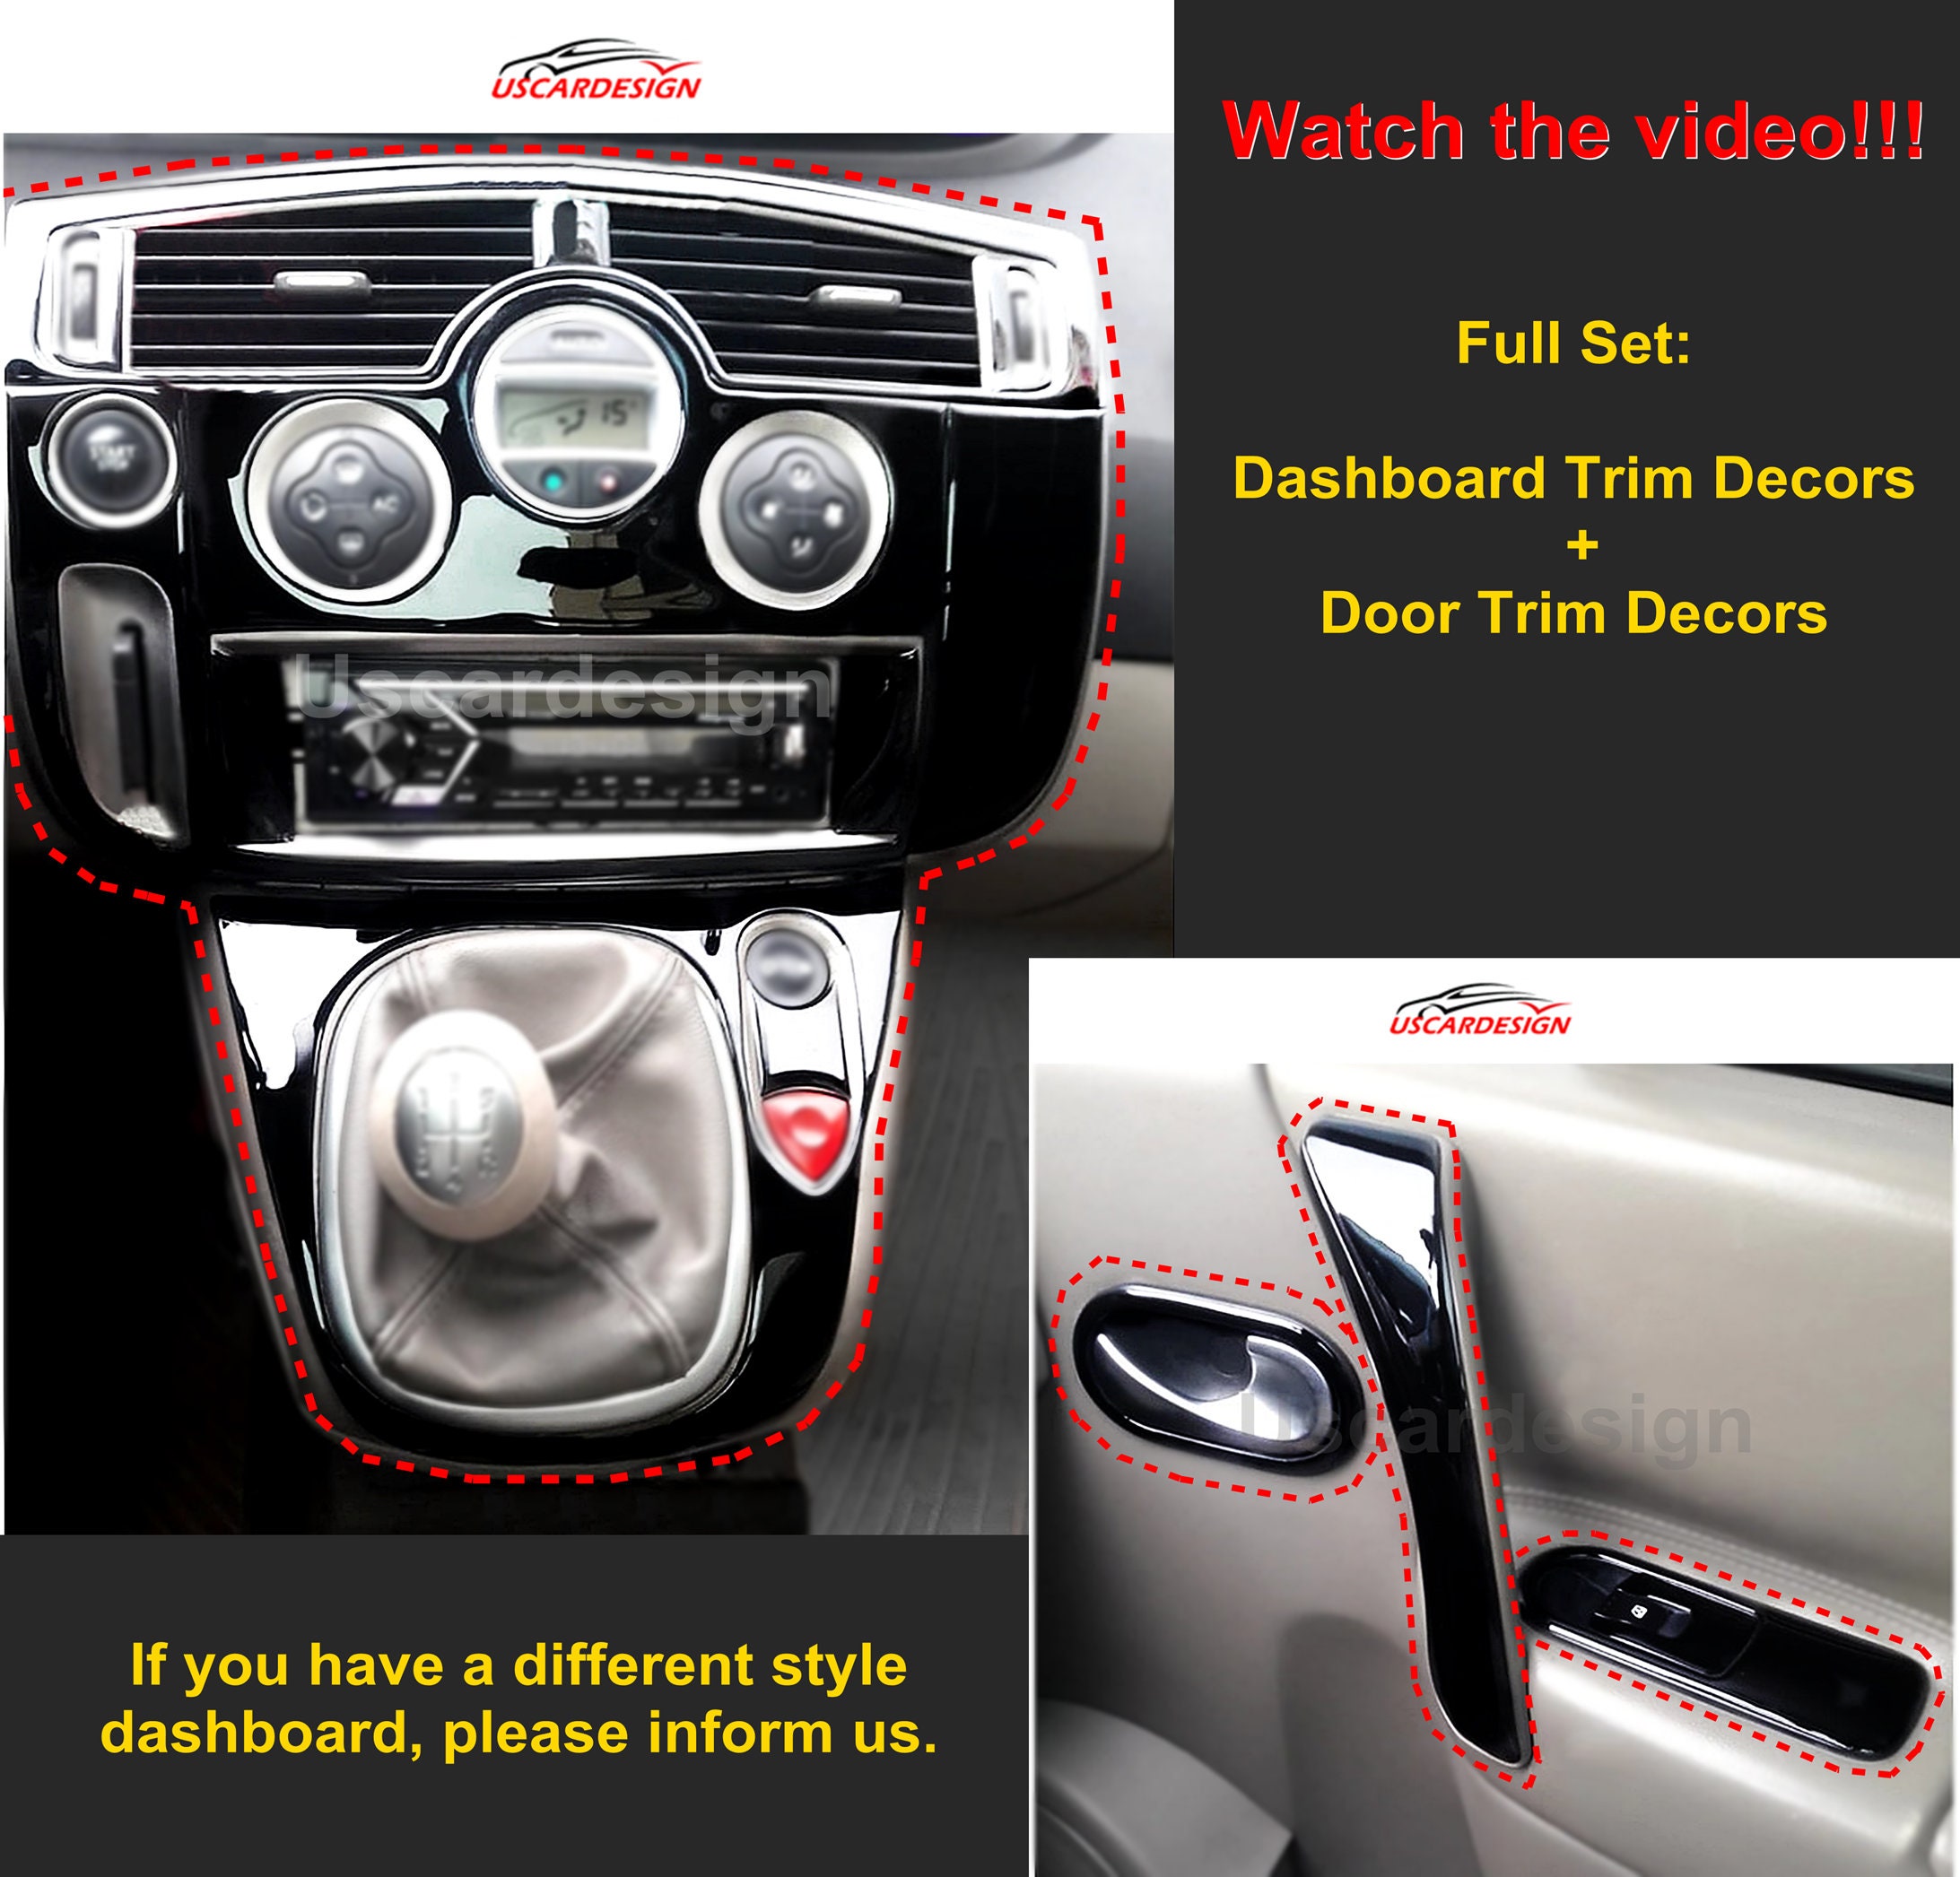 For Renault Scenic 2 Full doors Dashboard Decor Frames Piano Black / Carbon  Fiber / Glossy Silver / Red / White / Wood 